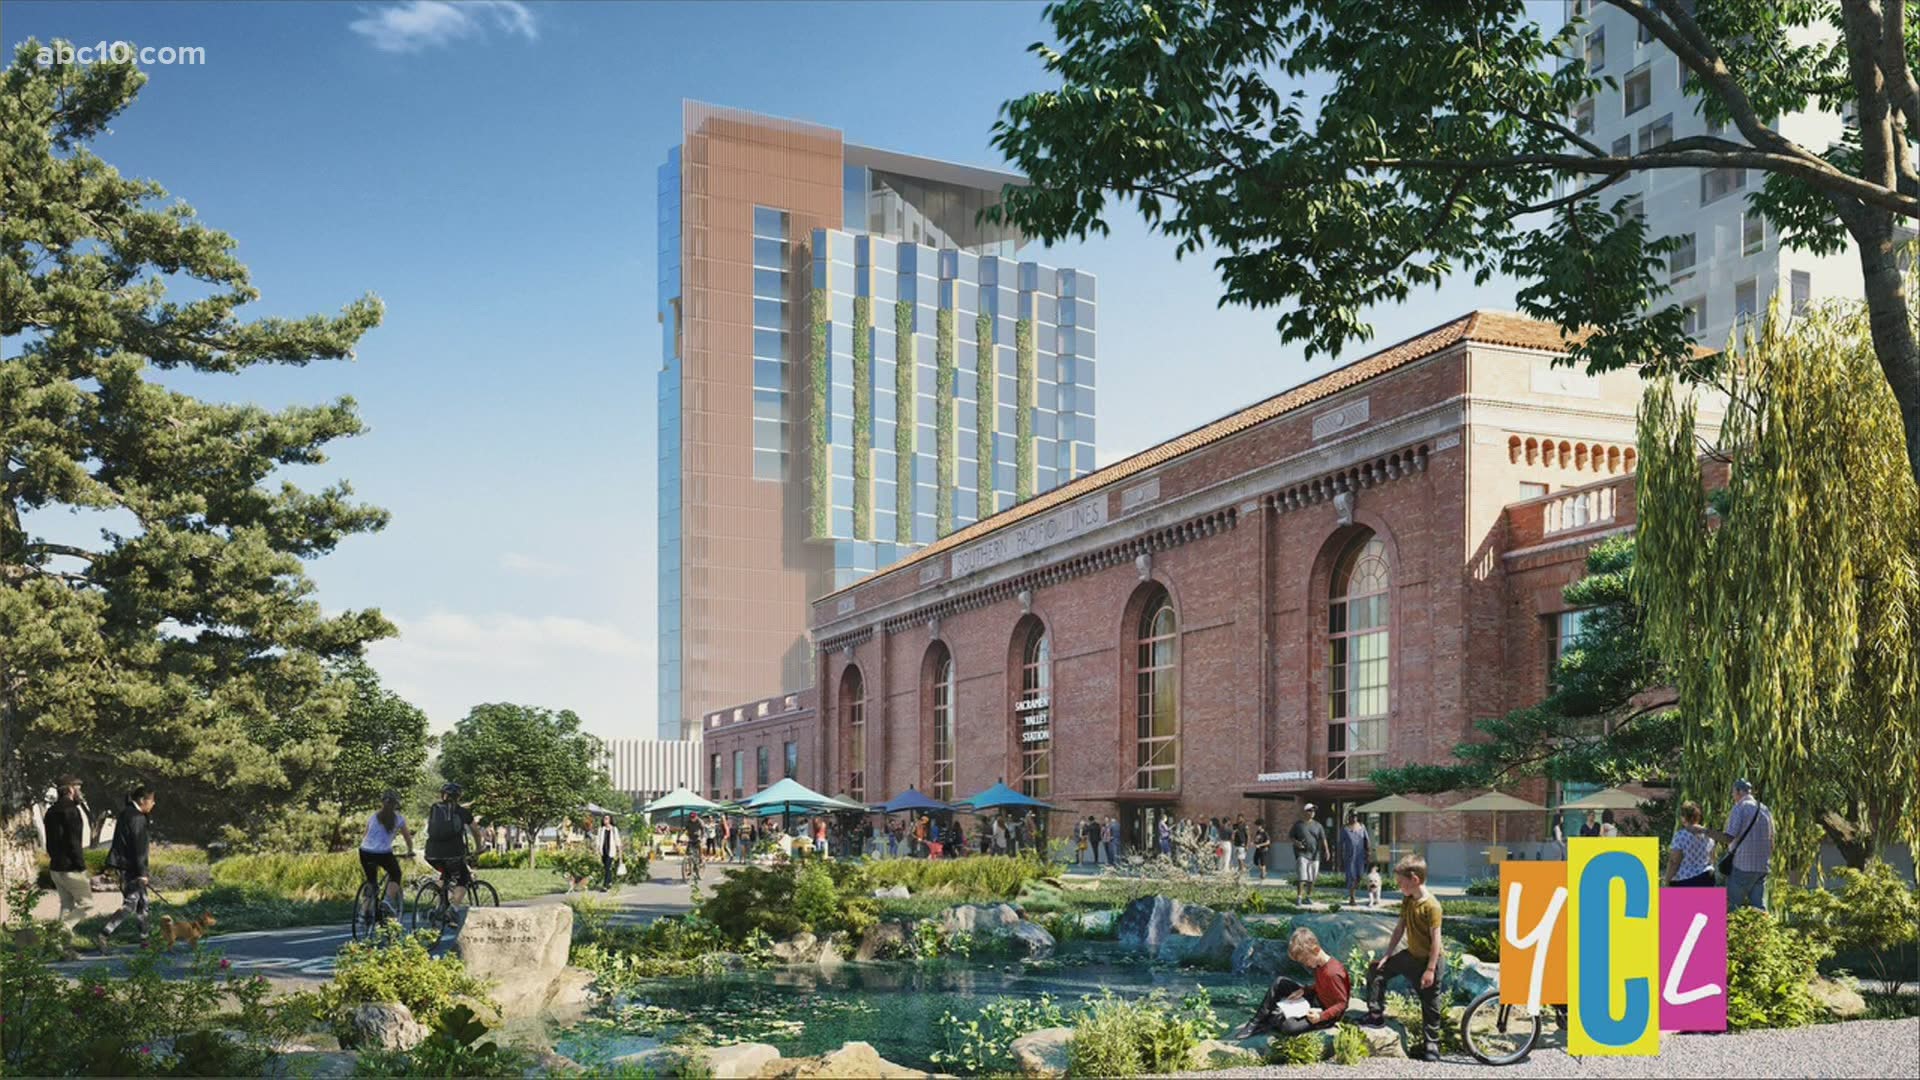 The Sacramento Valley Station development will put  residents near key amenities & includes infrastructure to make it net-positive for carbon, water and energy use.